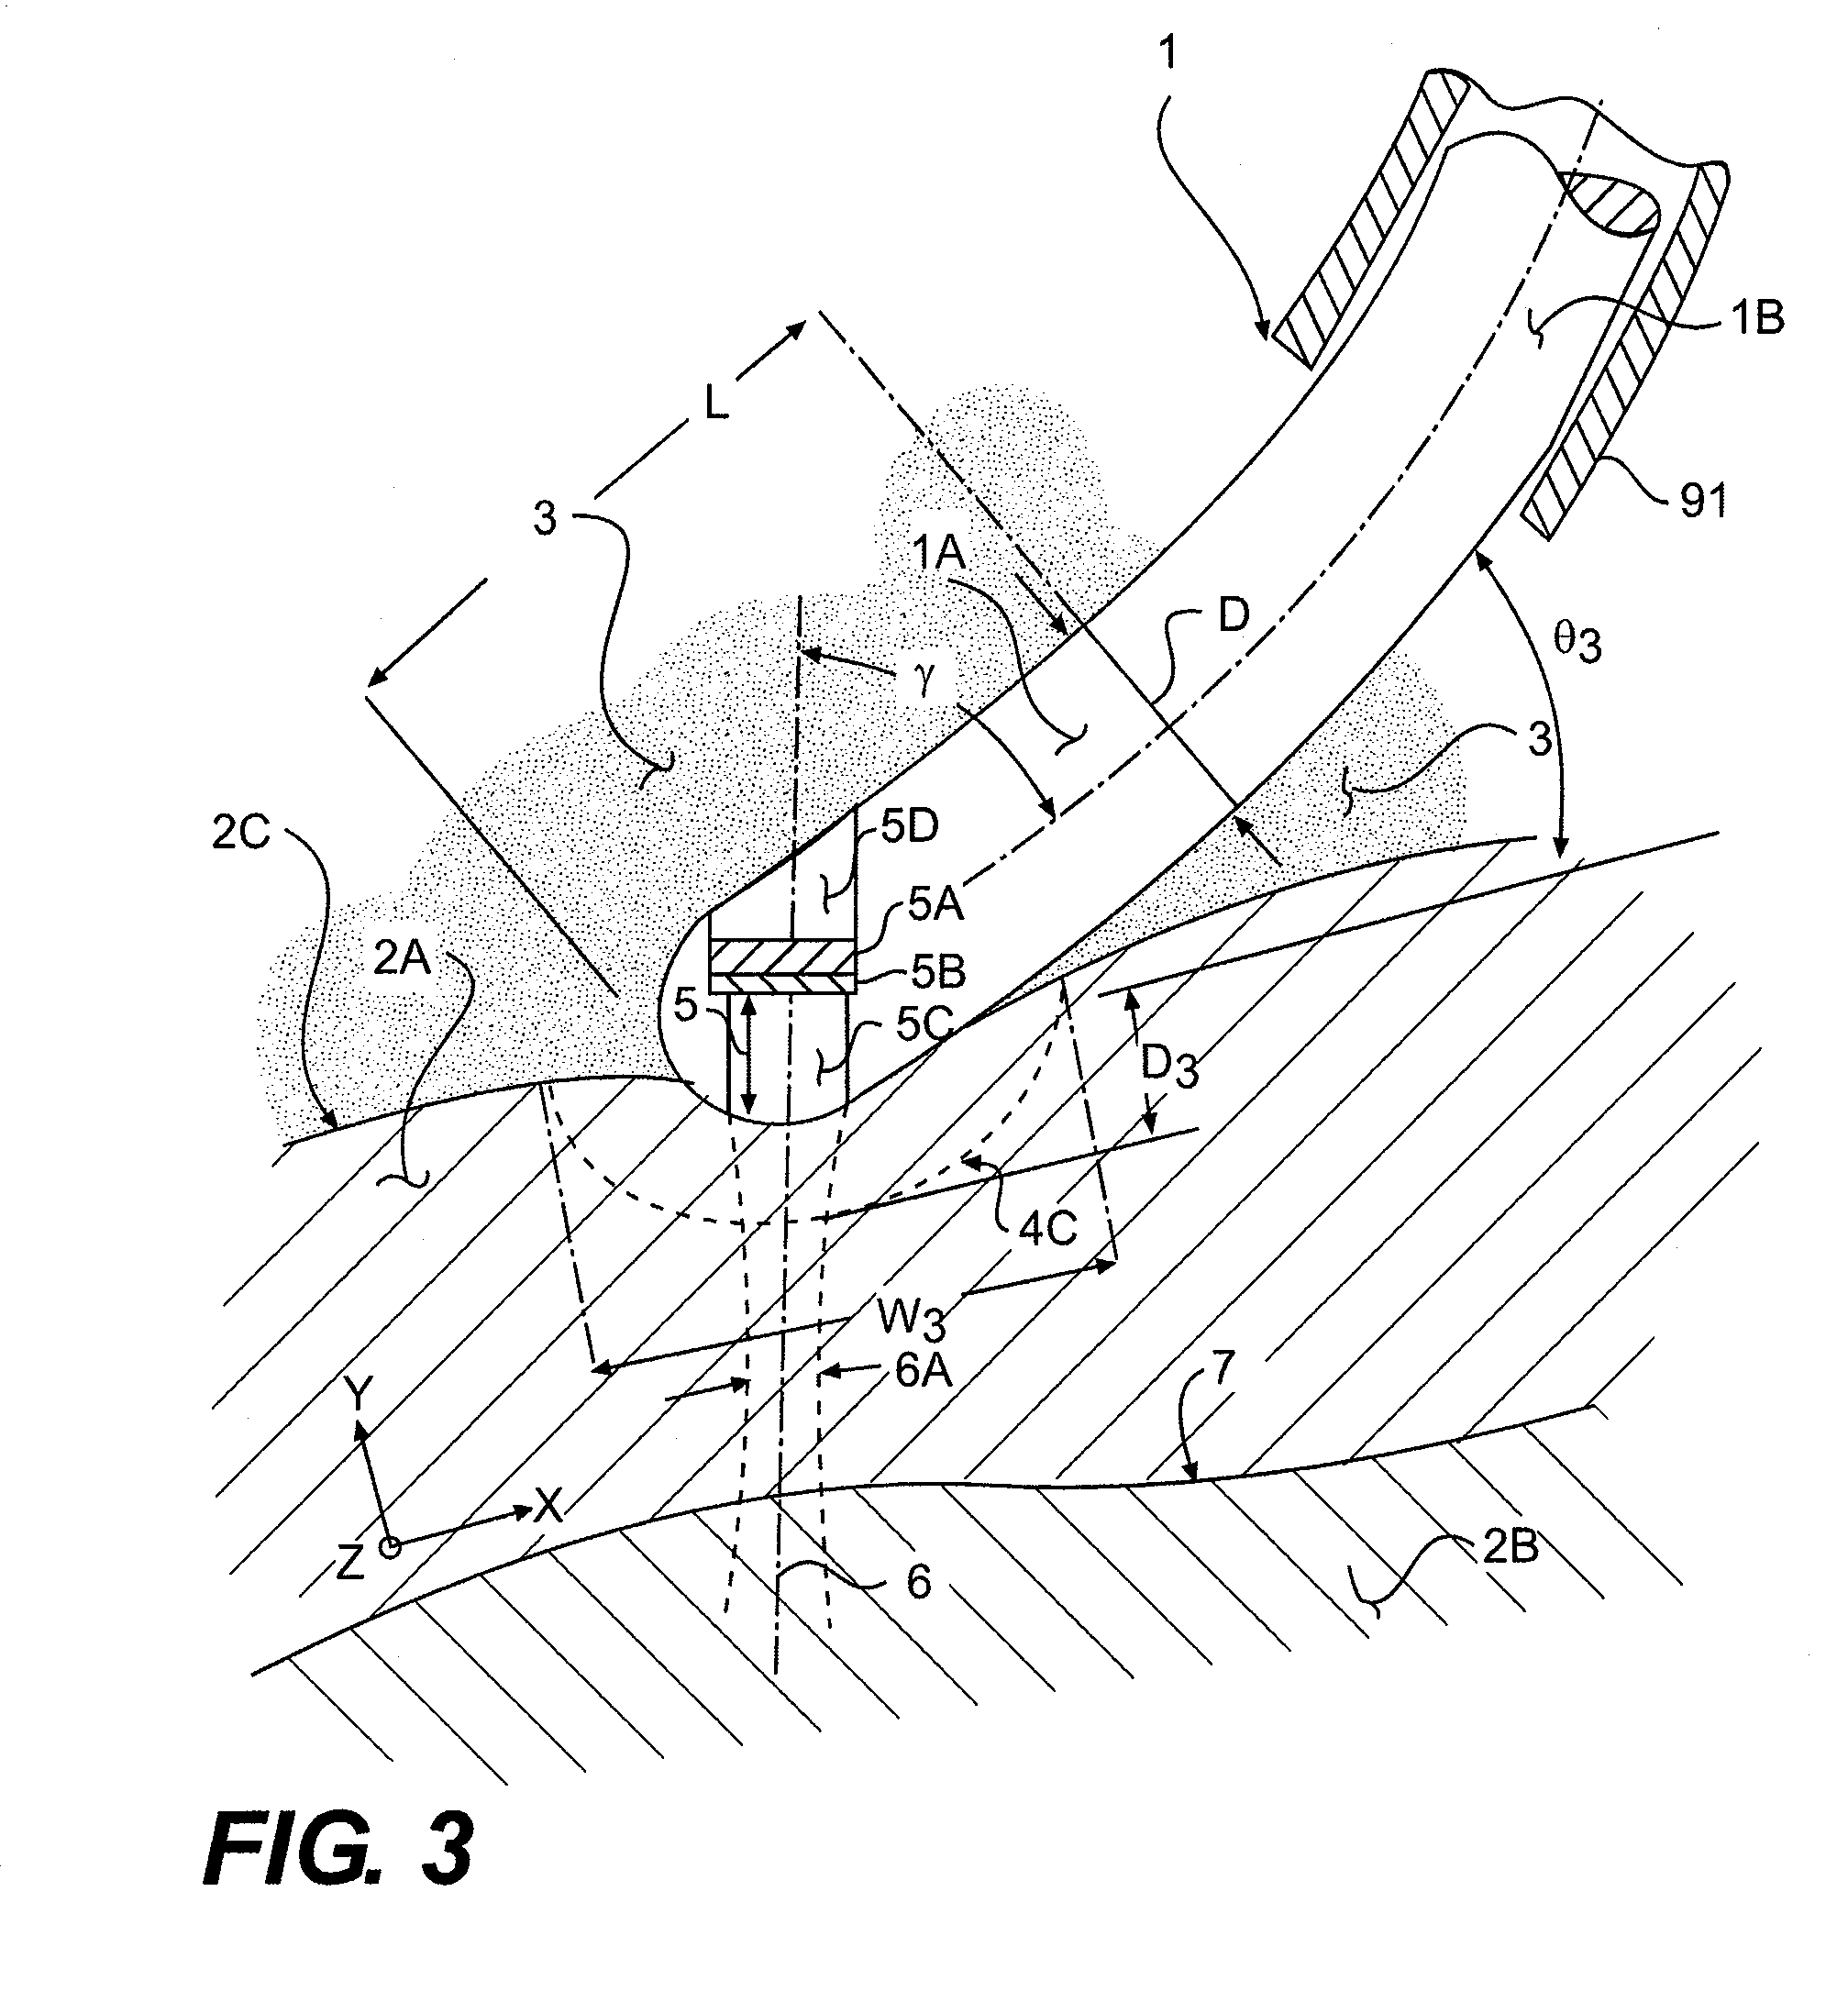 Arrangement and interface for RF ablation system with acoustic feedback